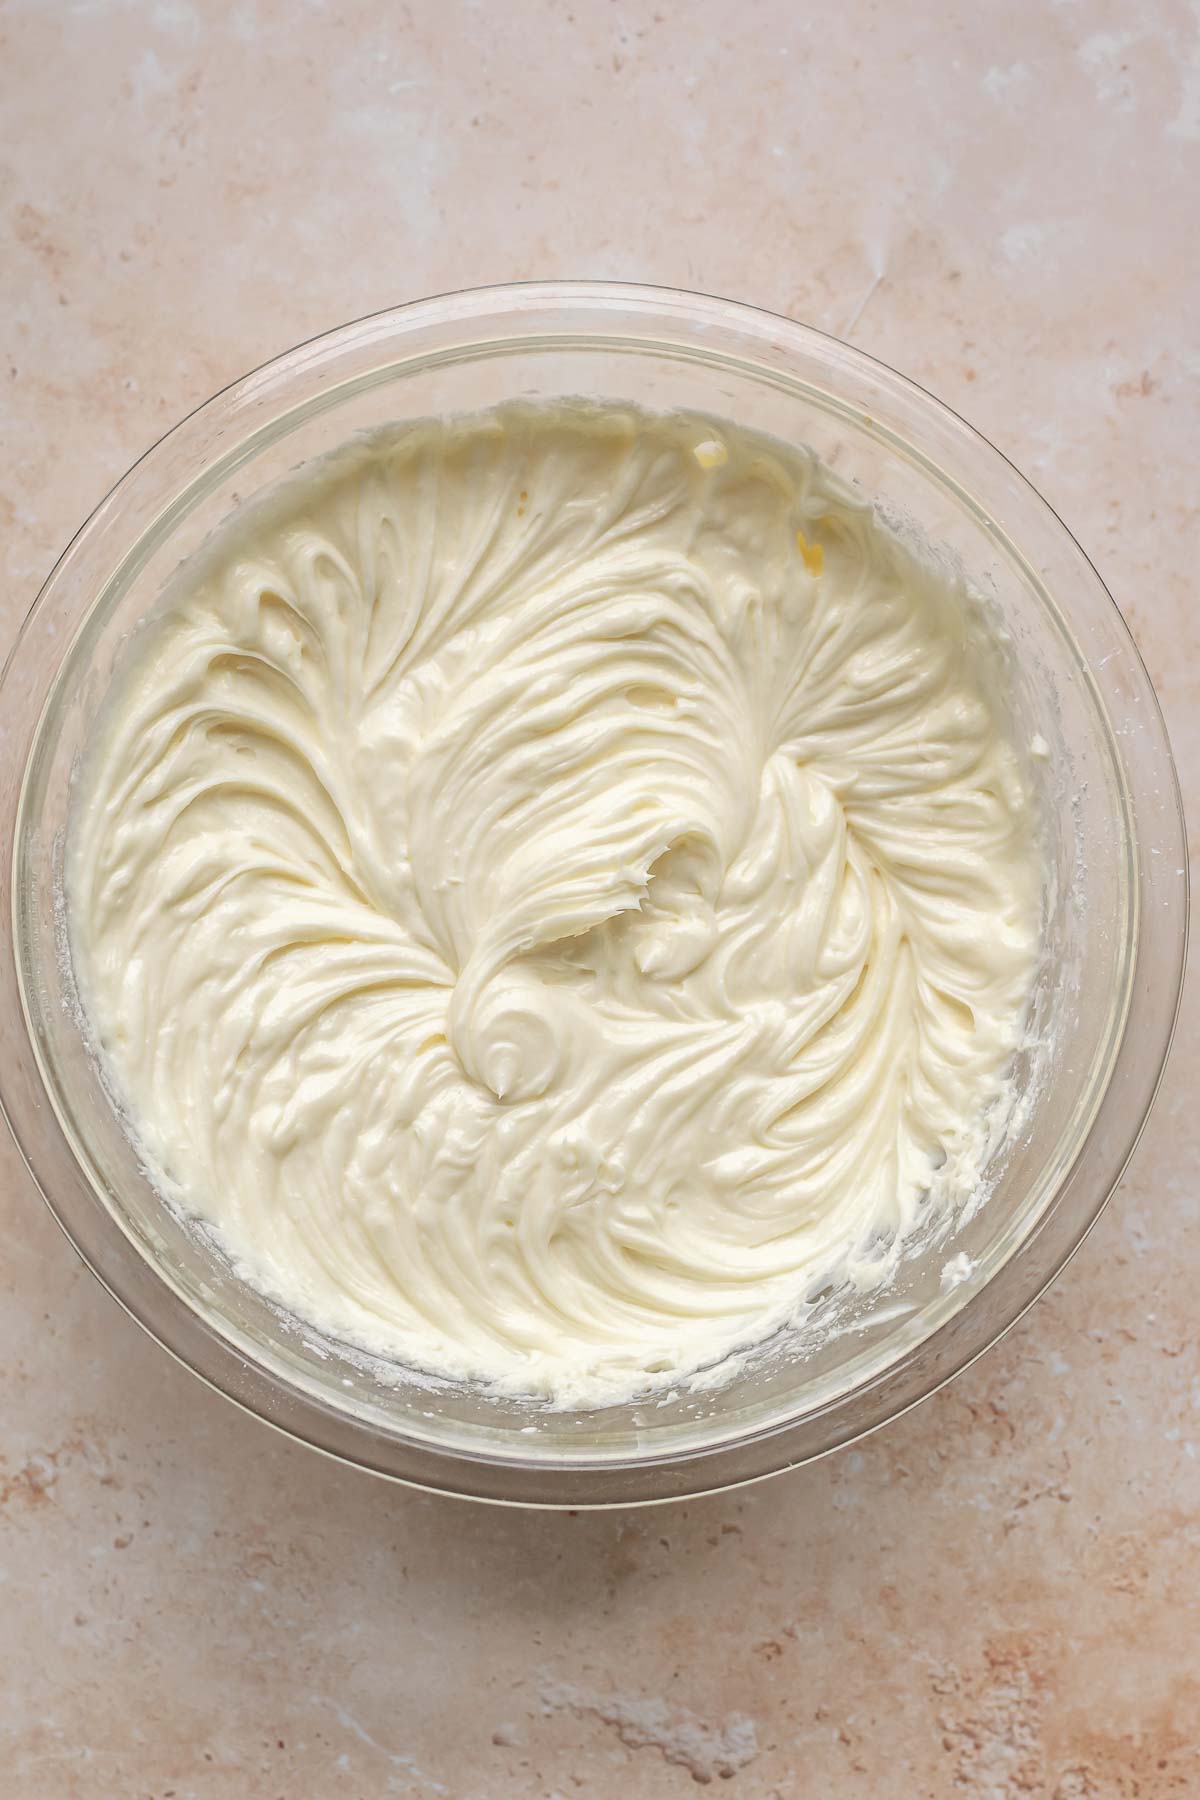 Cream cheese batter whisked in a mixing bowl.